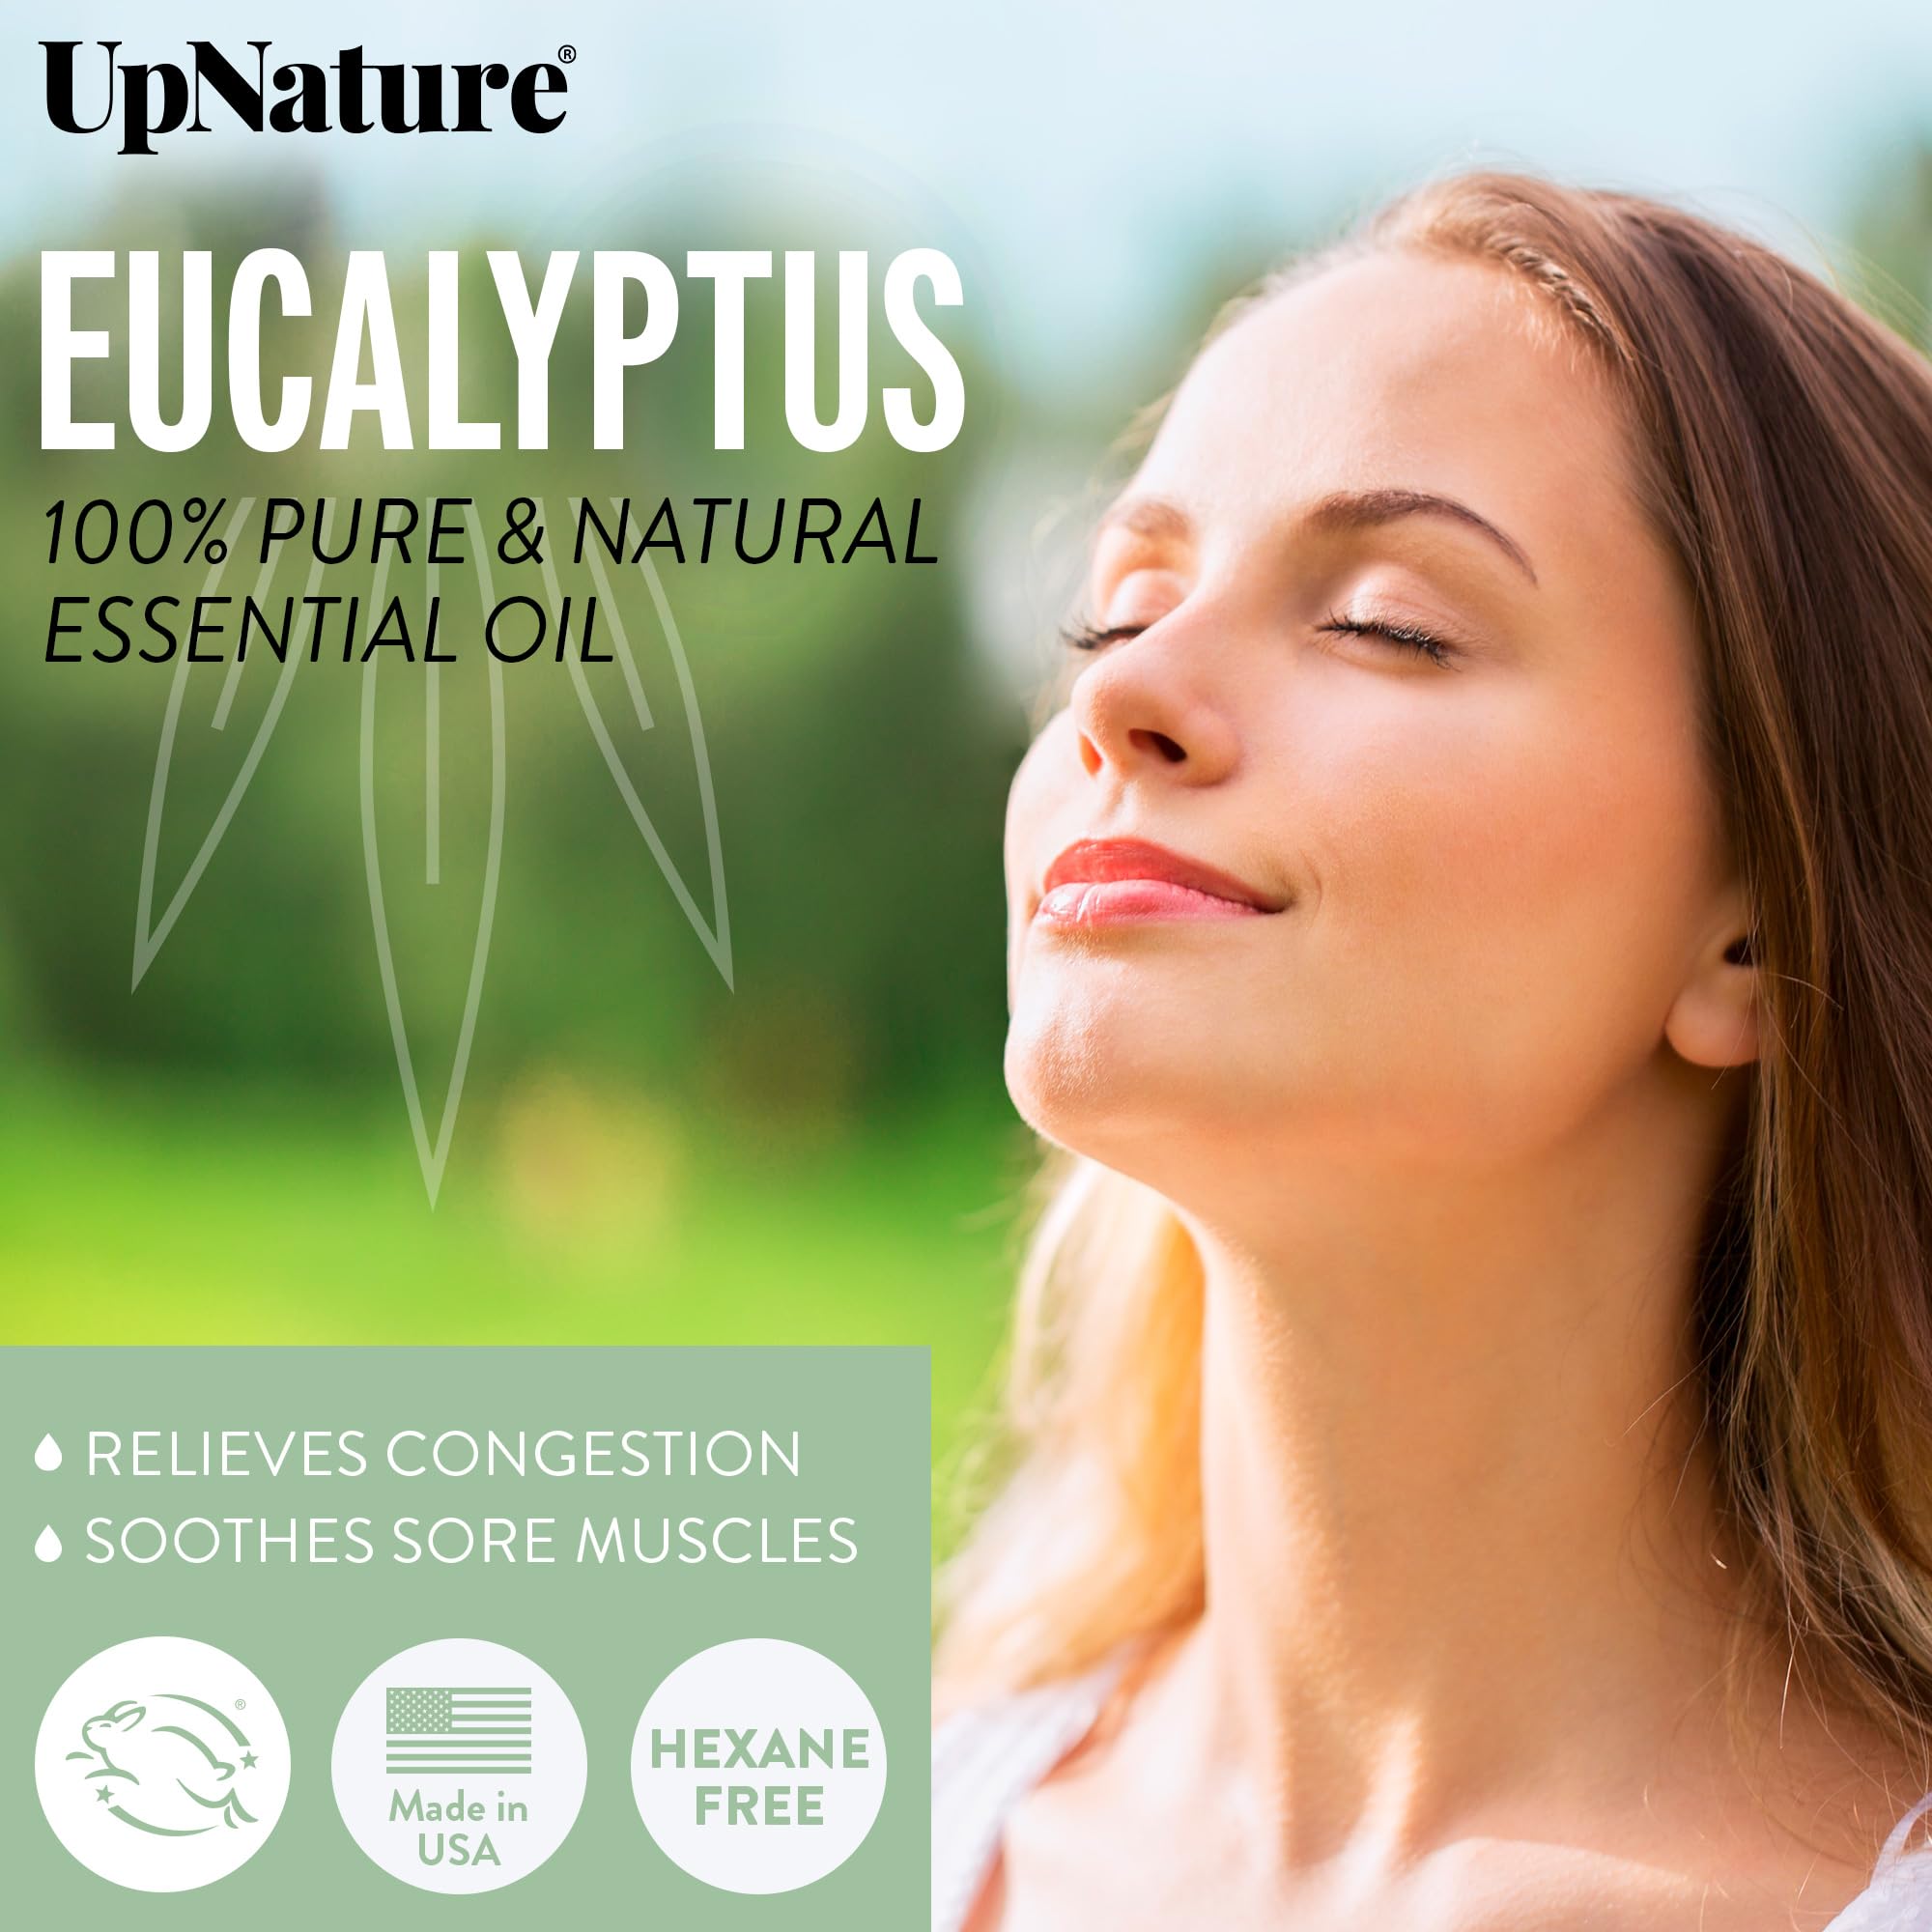 UpNature Eucalyptus Essential Oil - 100% Natural & Pure, Undiluted, Gifts Under 10 Dollars, Premium Quality Aromatherapy Oil- Eucalyptus Oil for Wellbeing, Relieve Sinus Congestion, Control Coughs